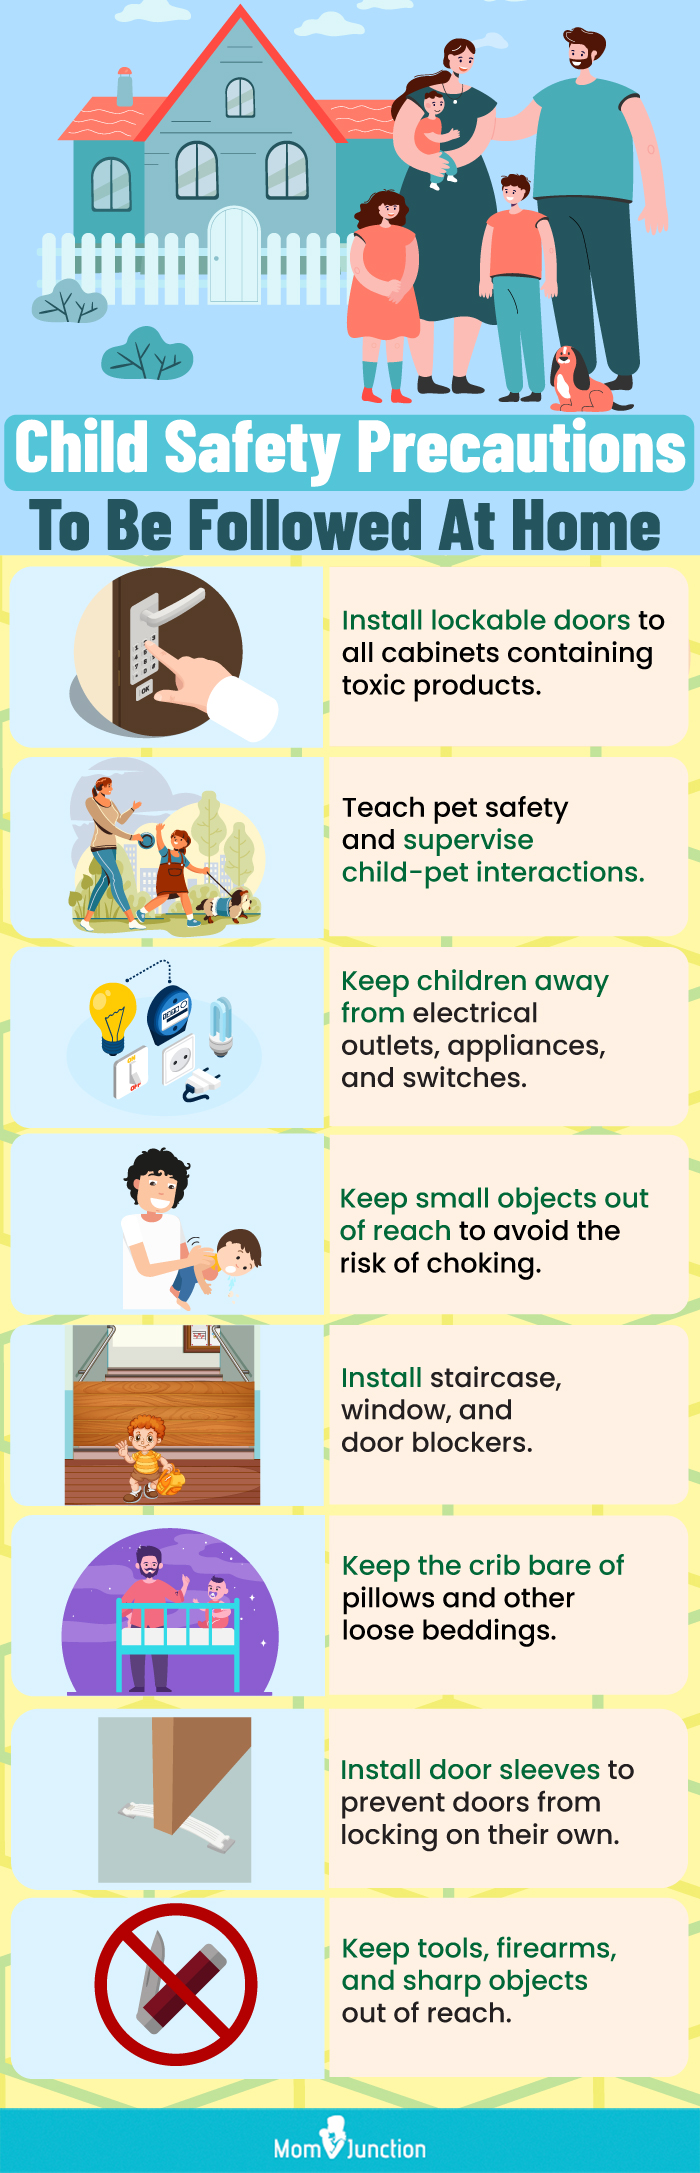 child safety precautions to be followed at home (infographic)